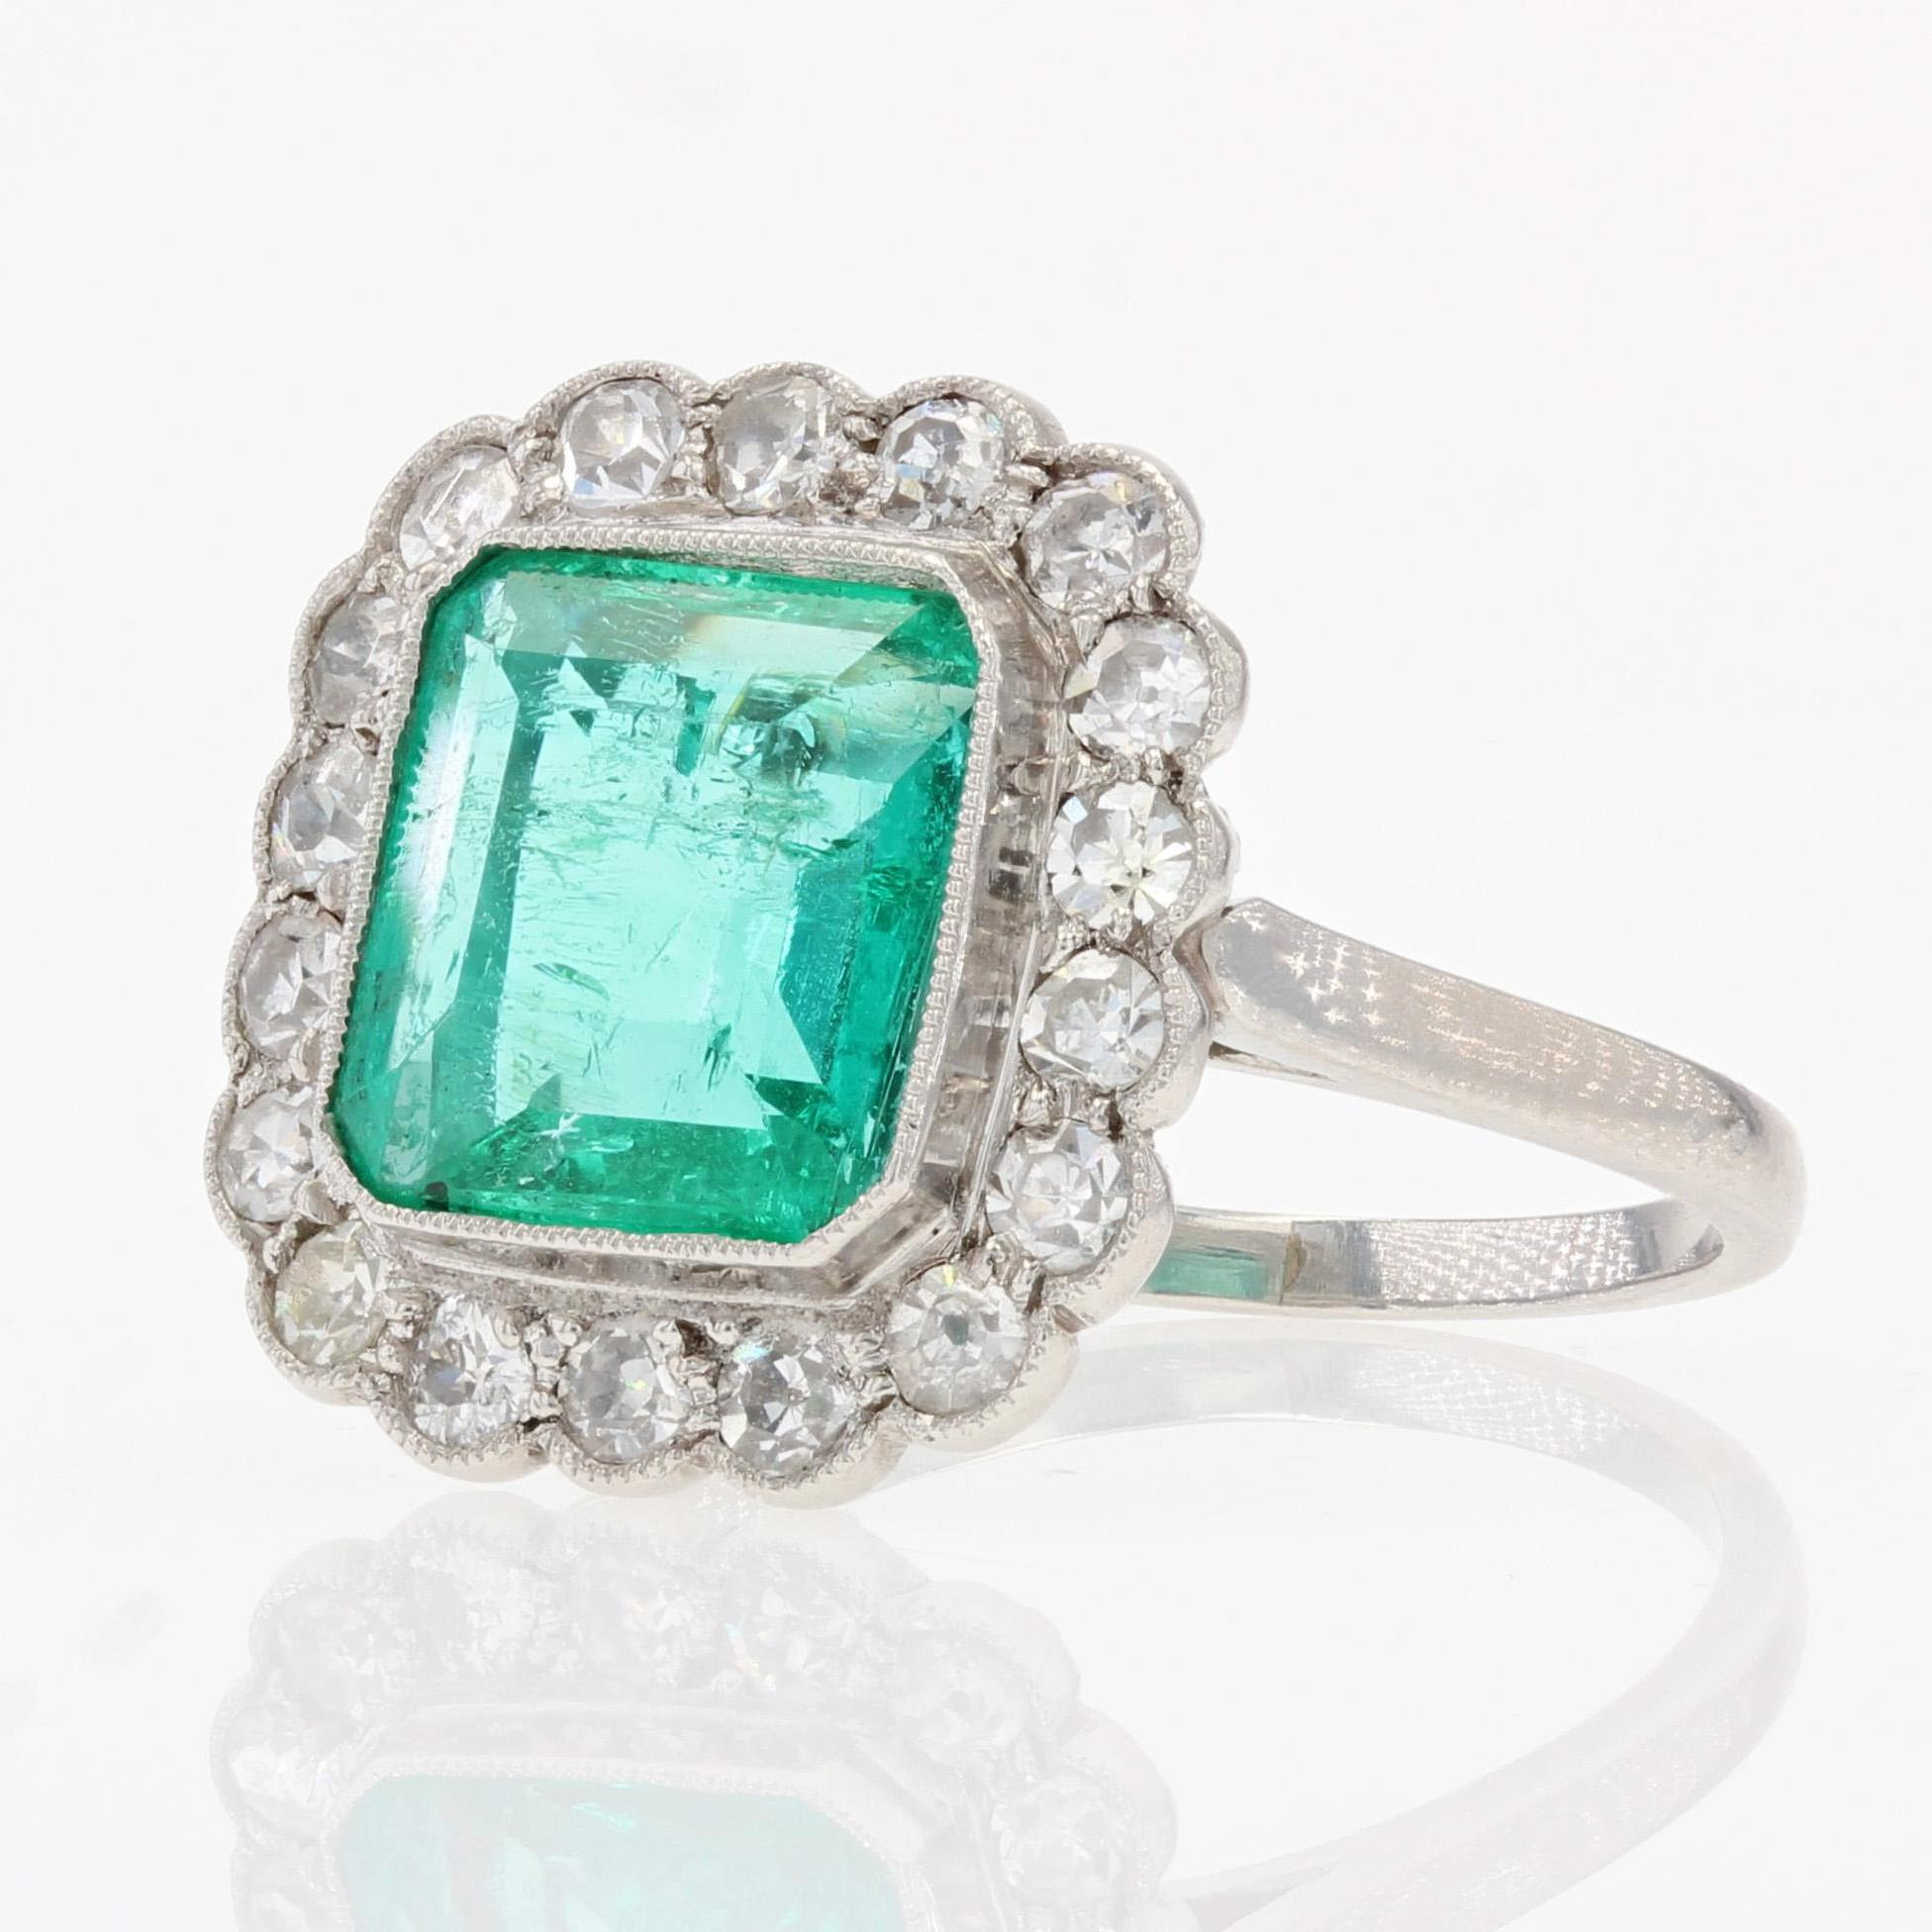 Women's French 1925s Art Deco Insignificant Colombian Emerald Diamond Platinum Ring For Sale